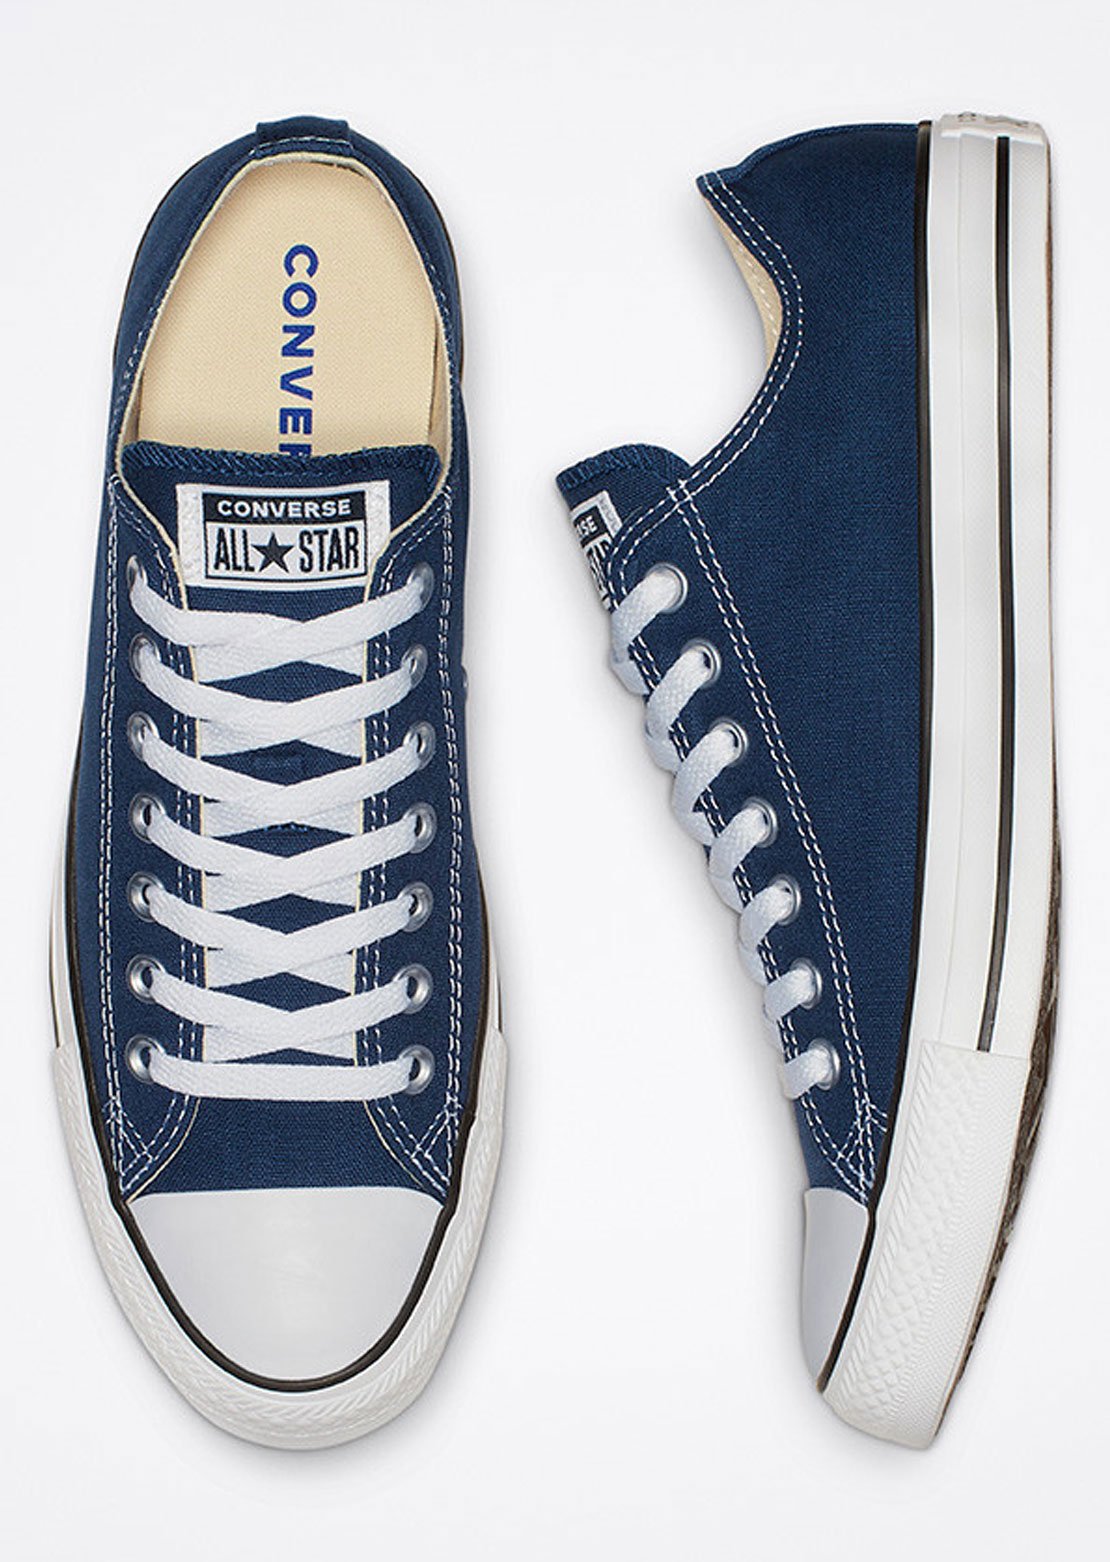 Converse Unisex Chuck Taylor All Star Shoes Navy